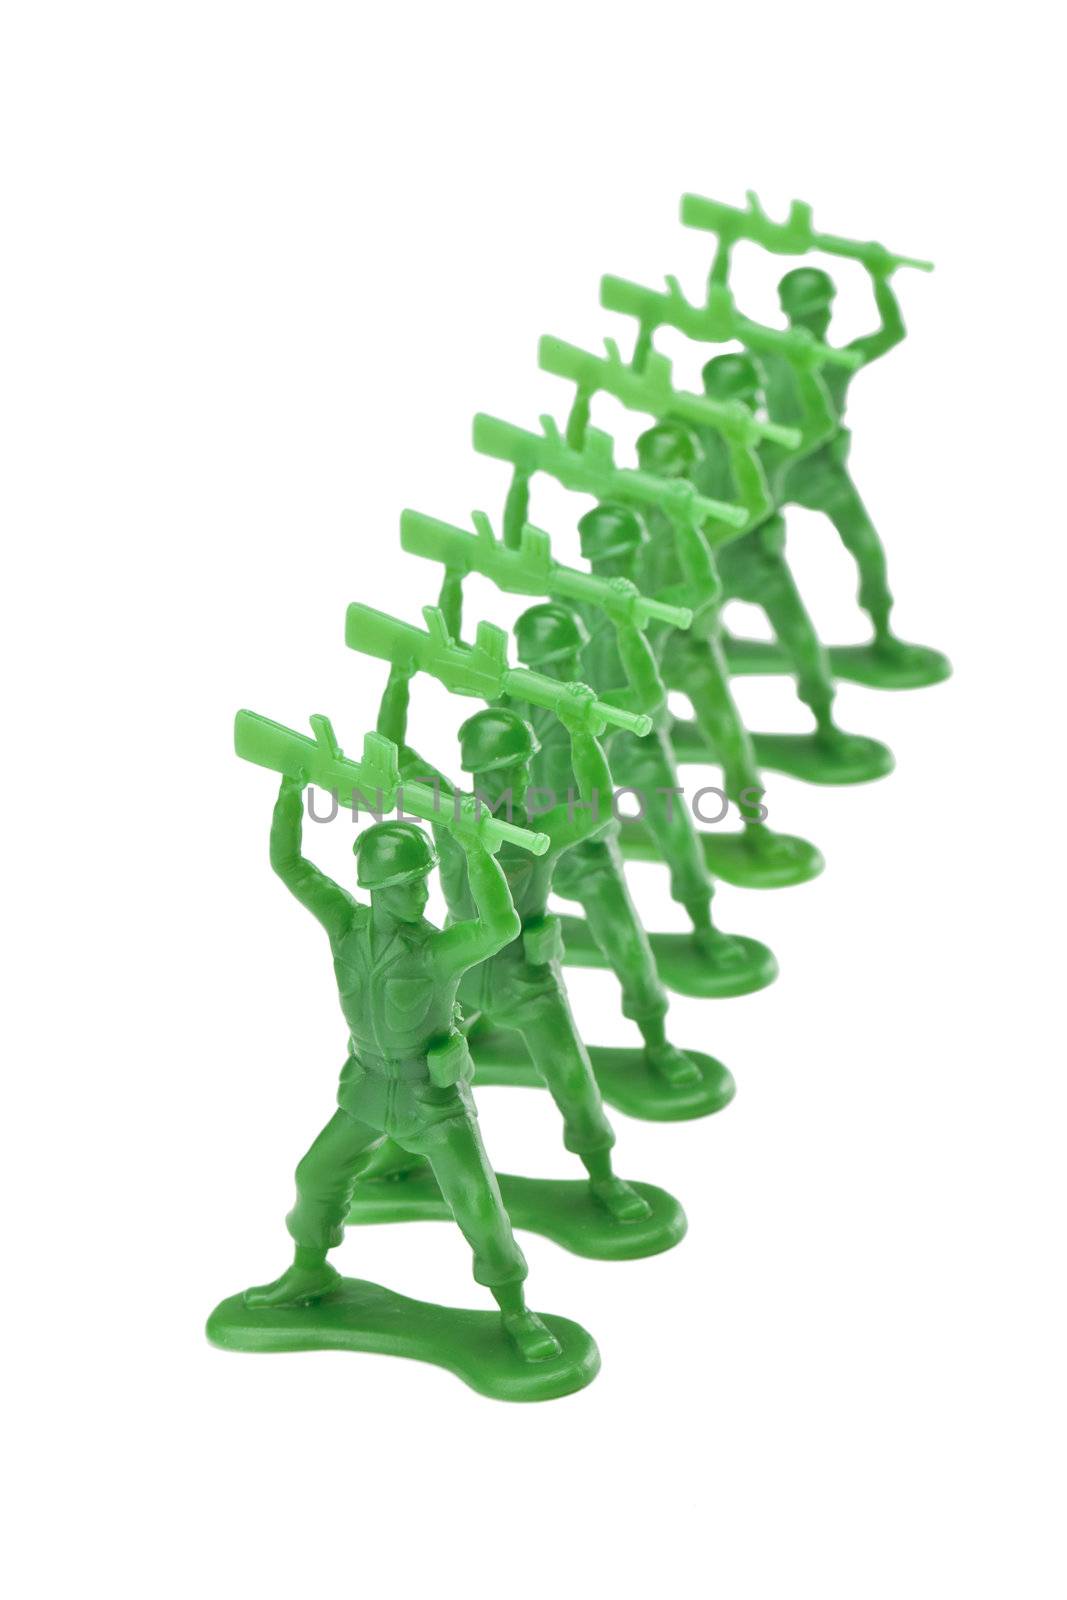 pieces of green toy soldiers by kozzi